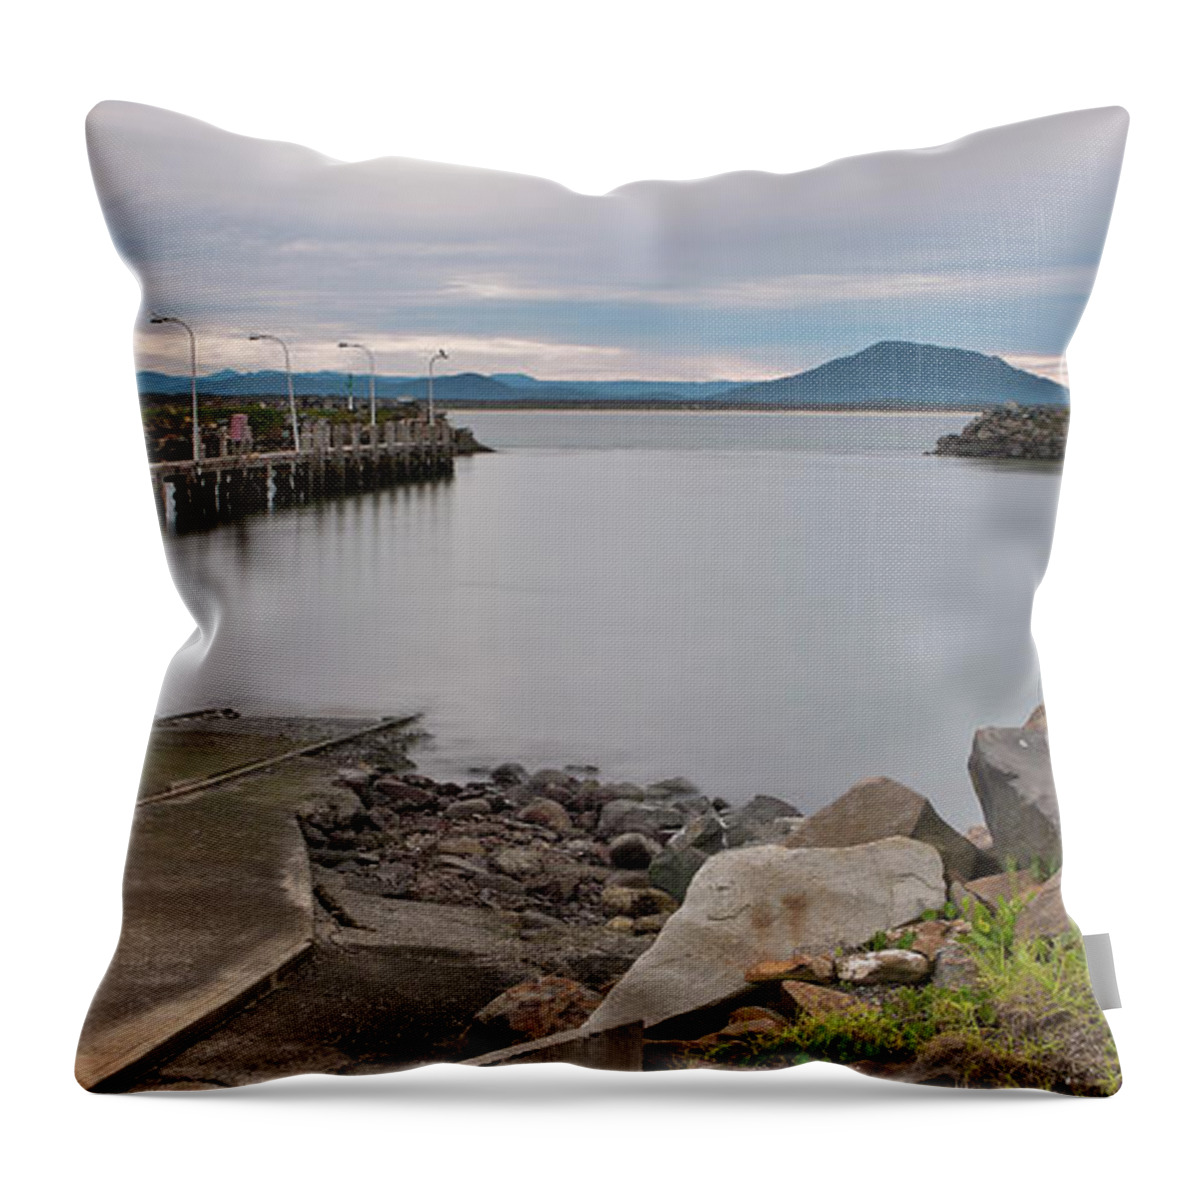 Crowdy Head Slipway Throw Pillow featuring the digital art Crowdy Head Slipway 59 by Kevin Chippindall